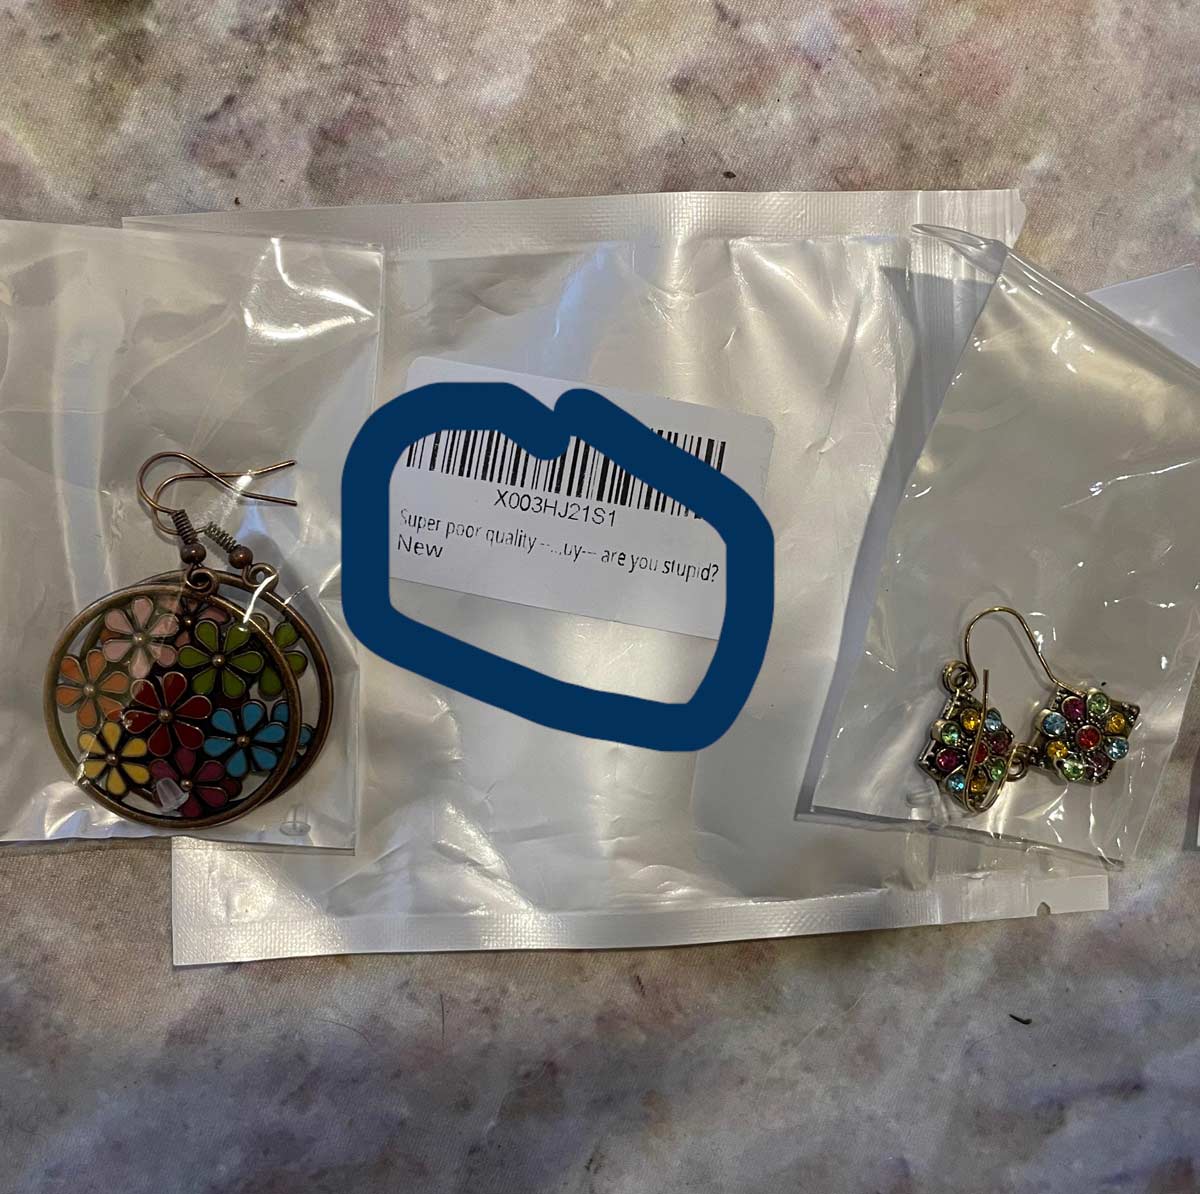 These earrings bought on Amazon are labeled Super poor quality...by, are you stupid?